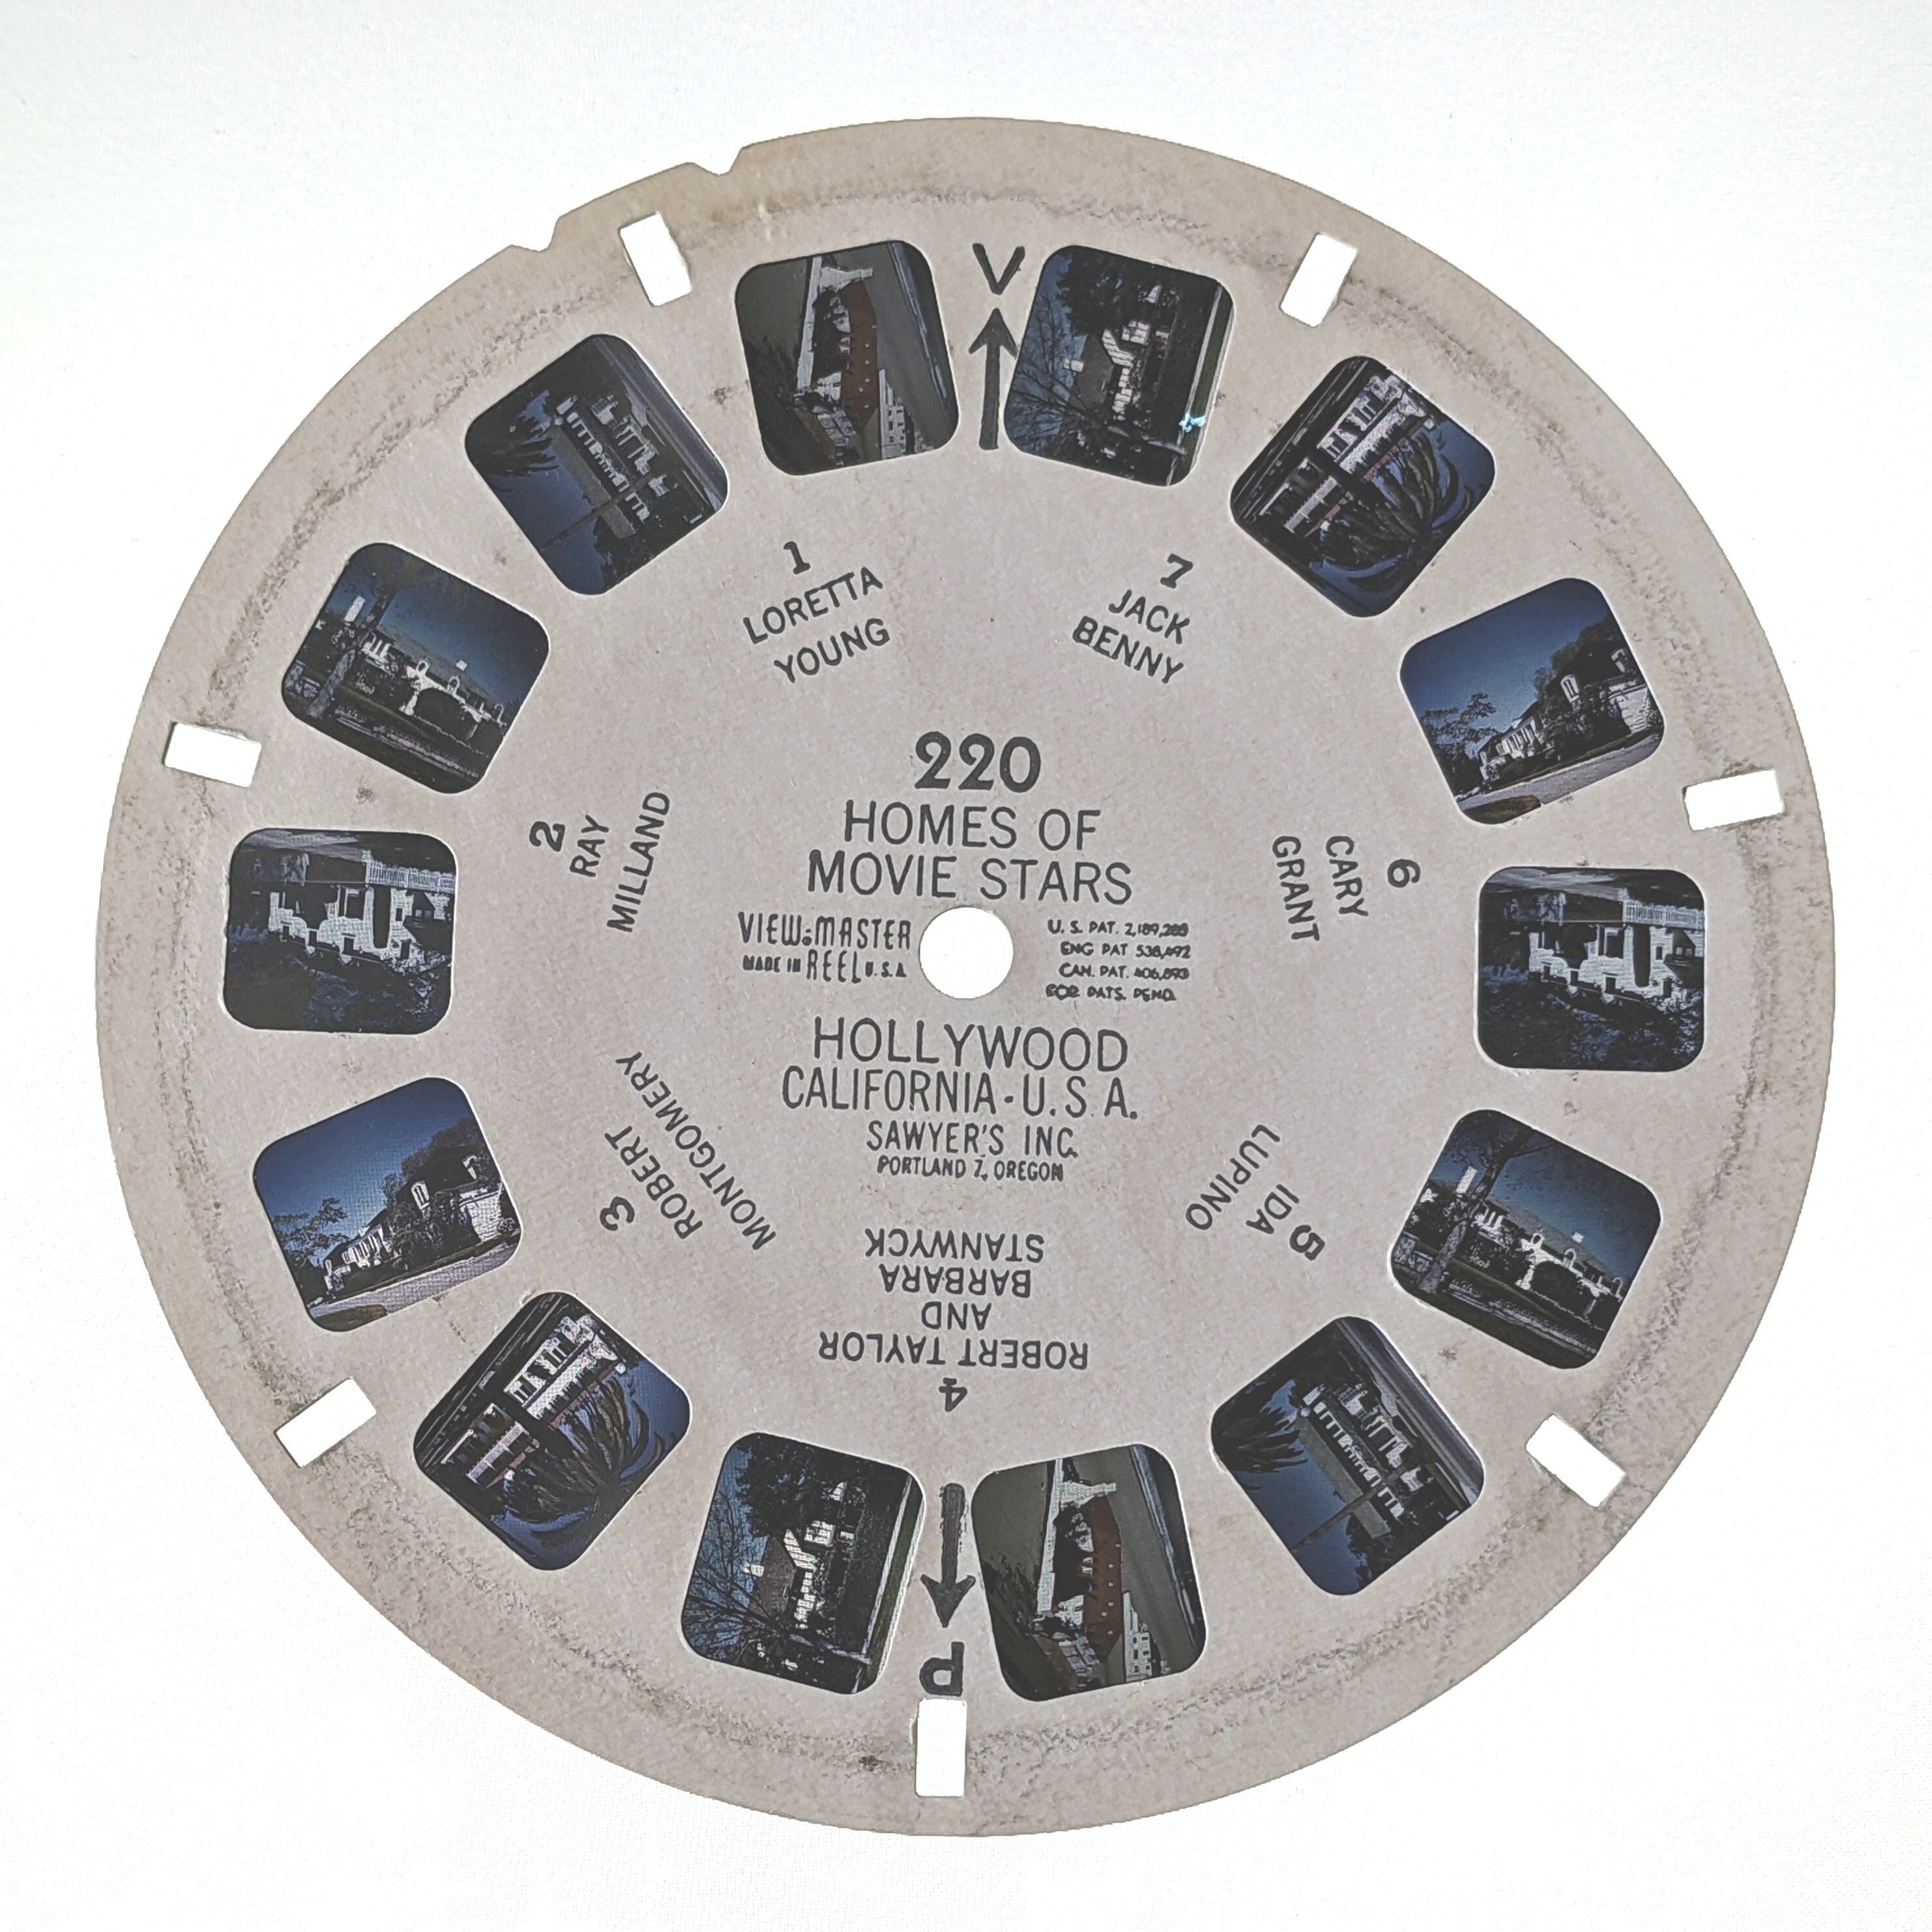 Viewmaster Poster for Sale by lopesci